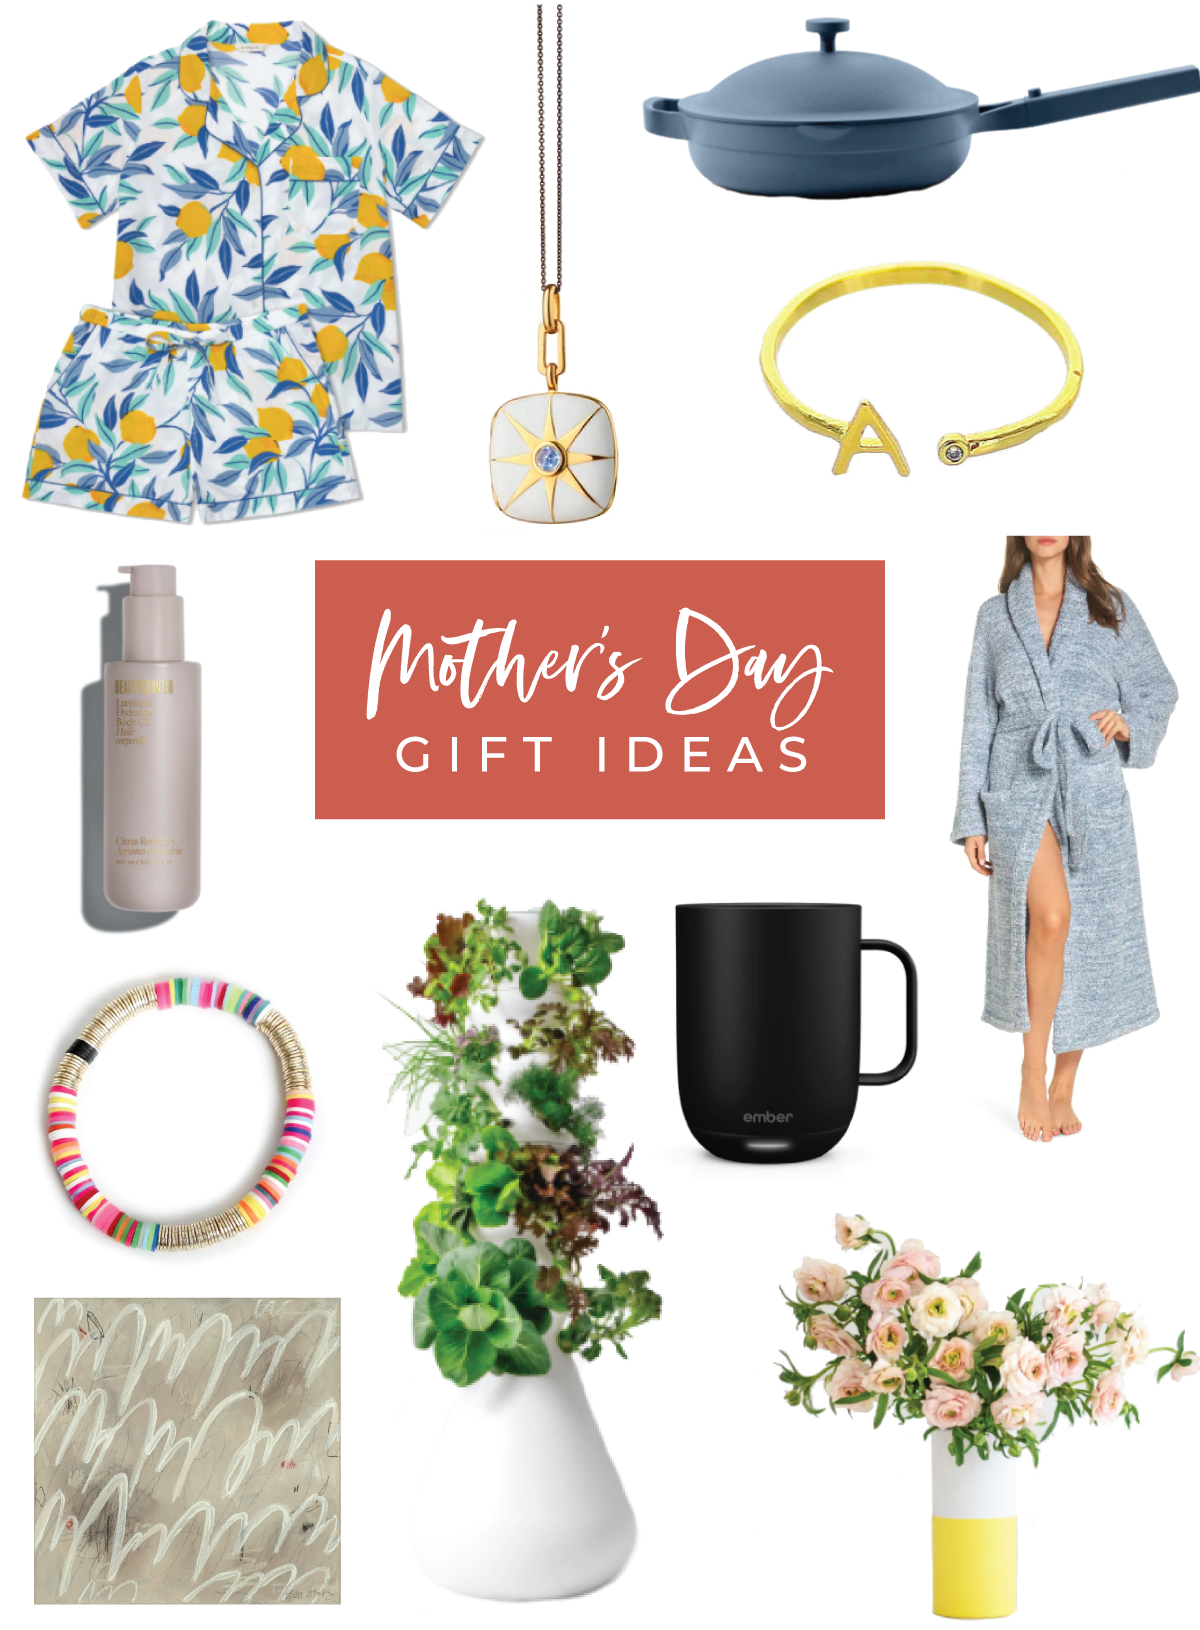 mother's day gift ideas 2021